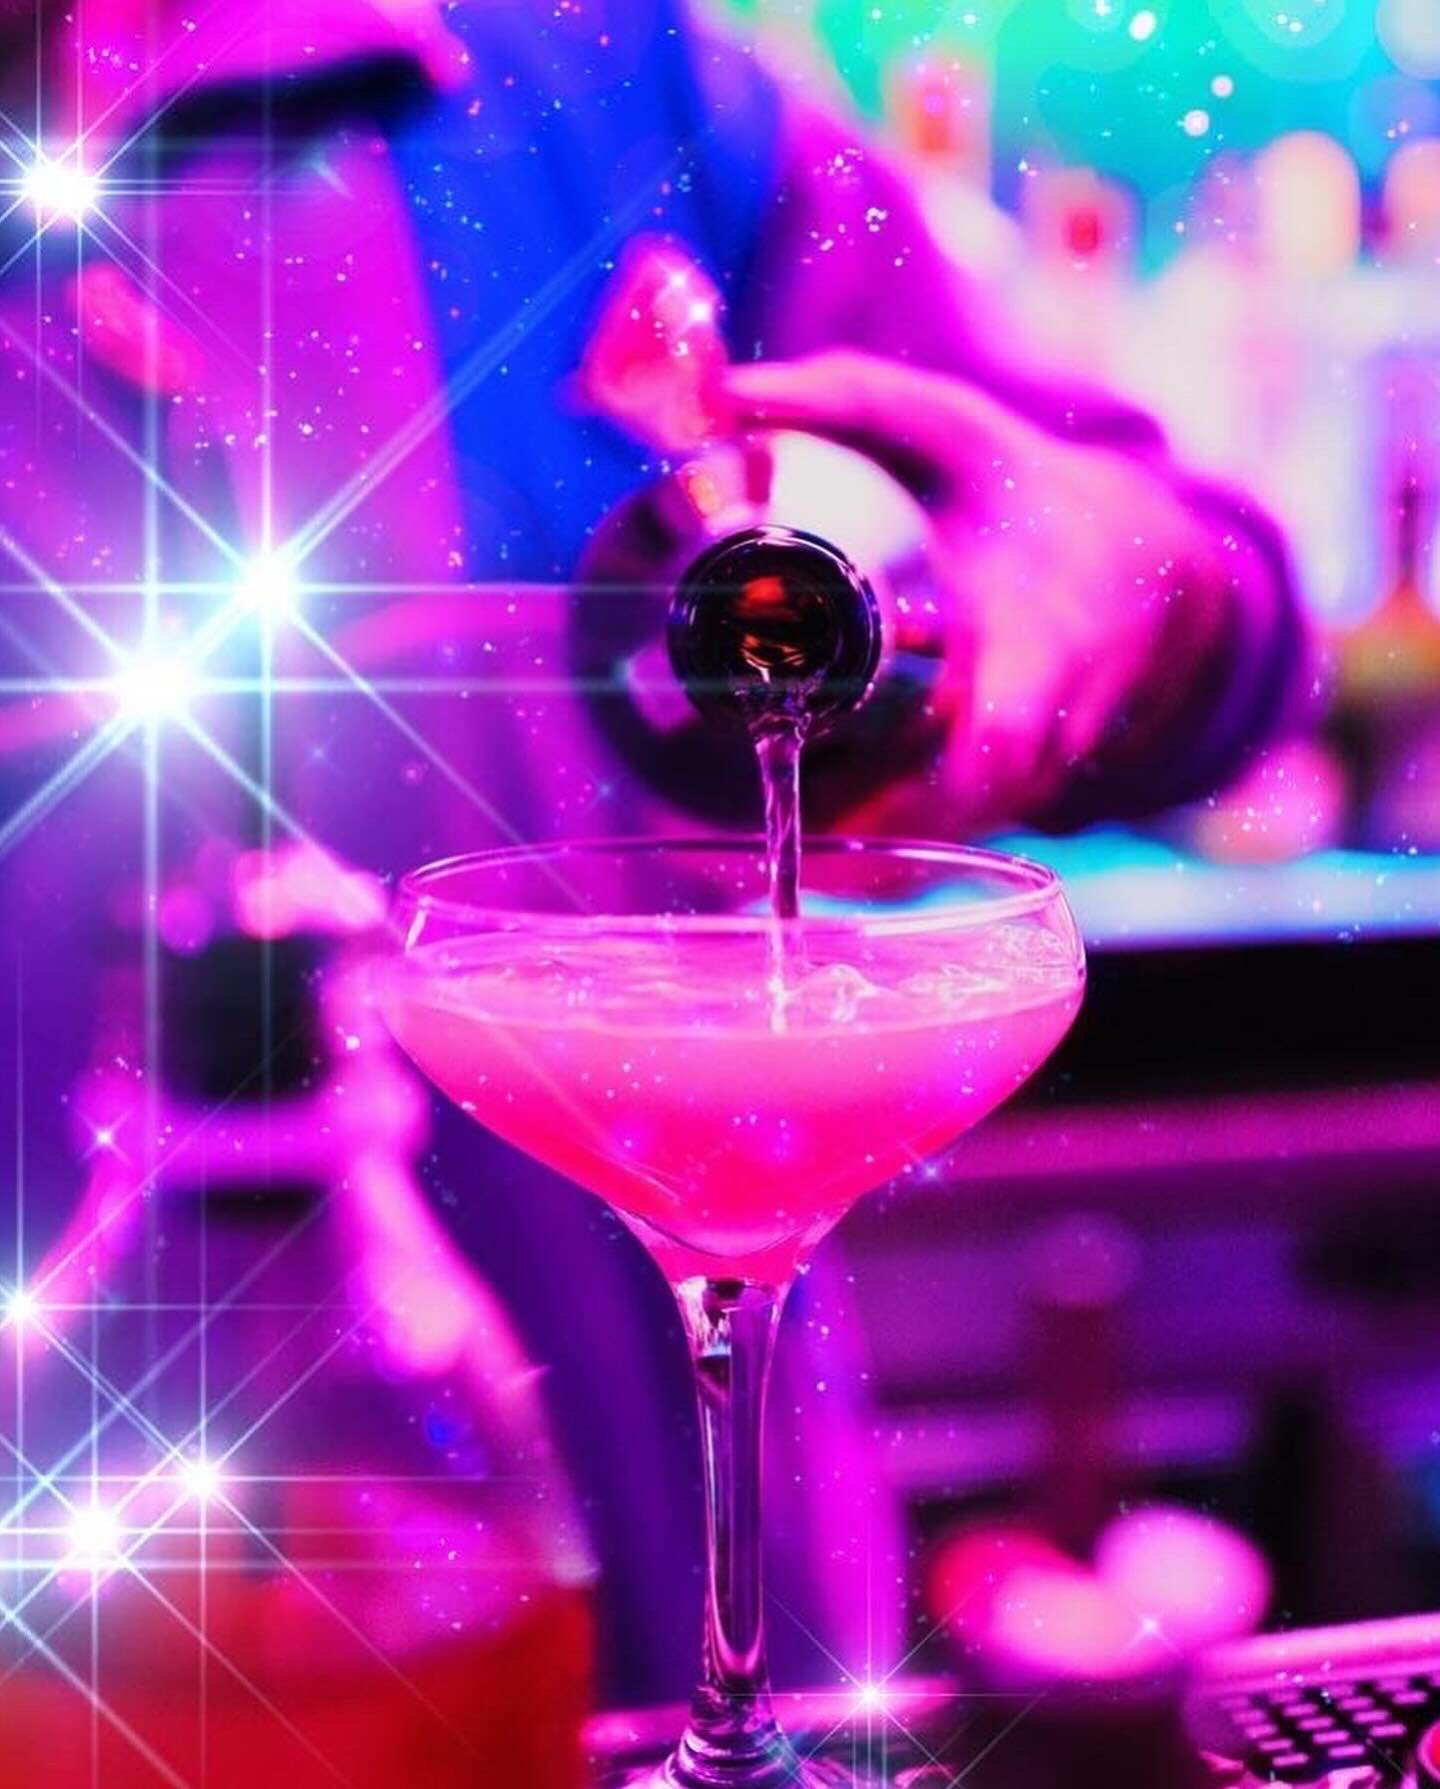 Diva Dance Party 💖 tonight 9pm- 2am with @thekingdiva on the digi decks 🎶 

Happy hour till 8pm 🍹 @buyback_mountain behind the bar till 2am!